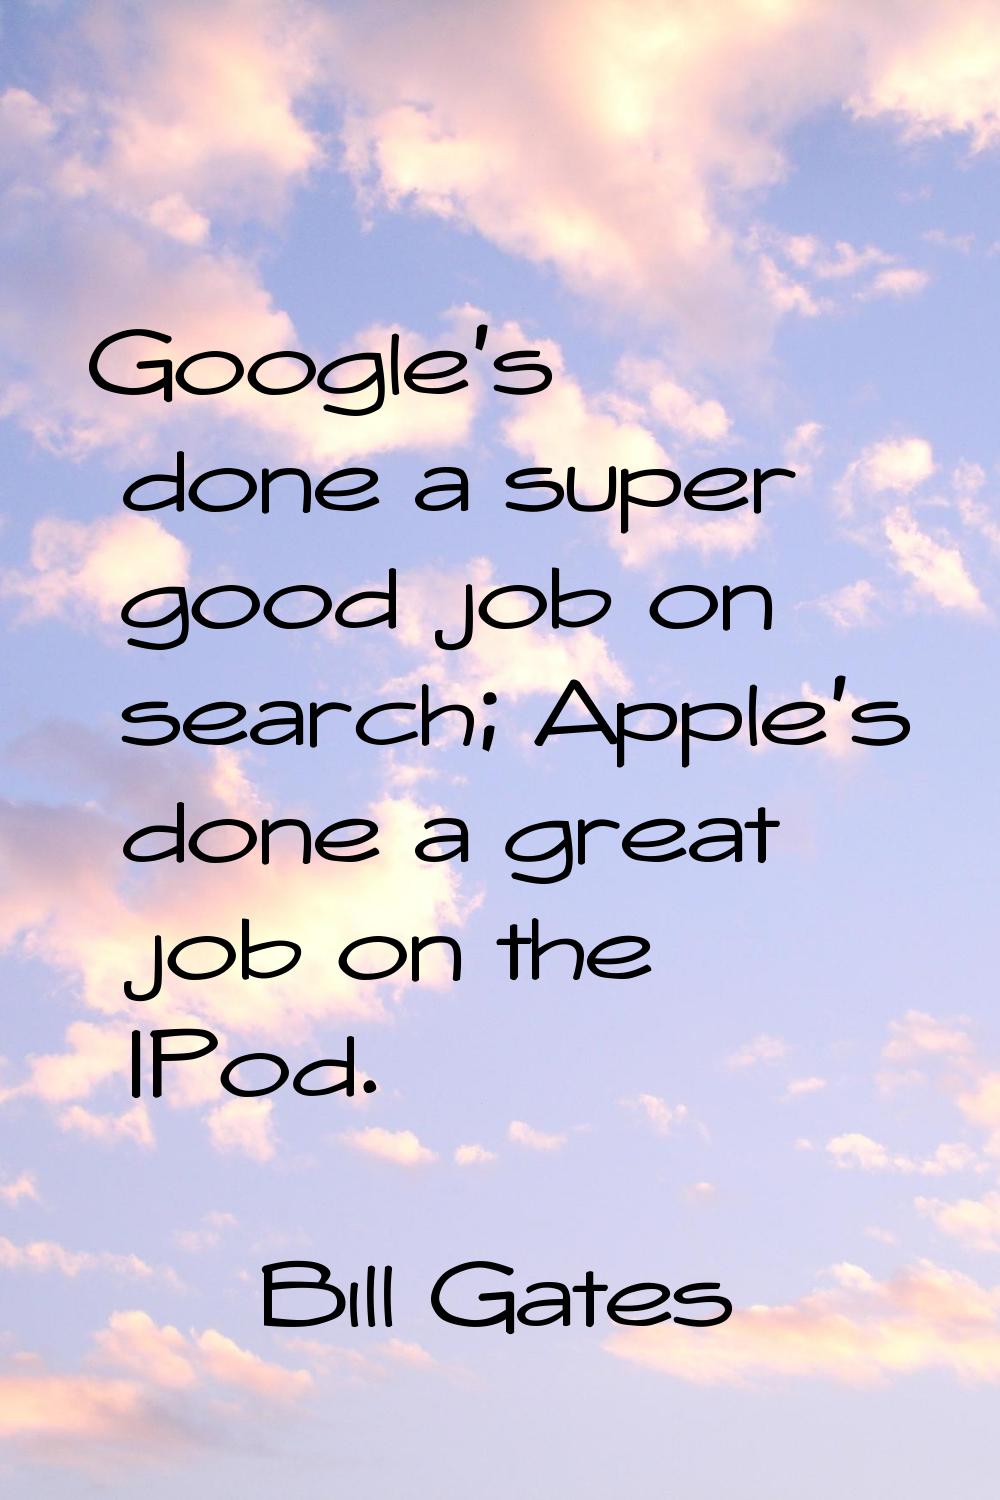 Google's done a super good job on search; Apple's done a great job on the IPod.